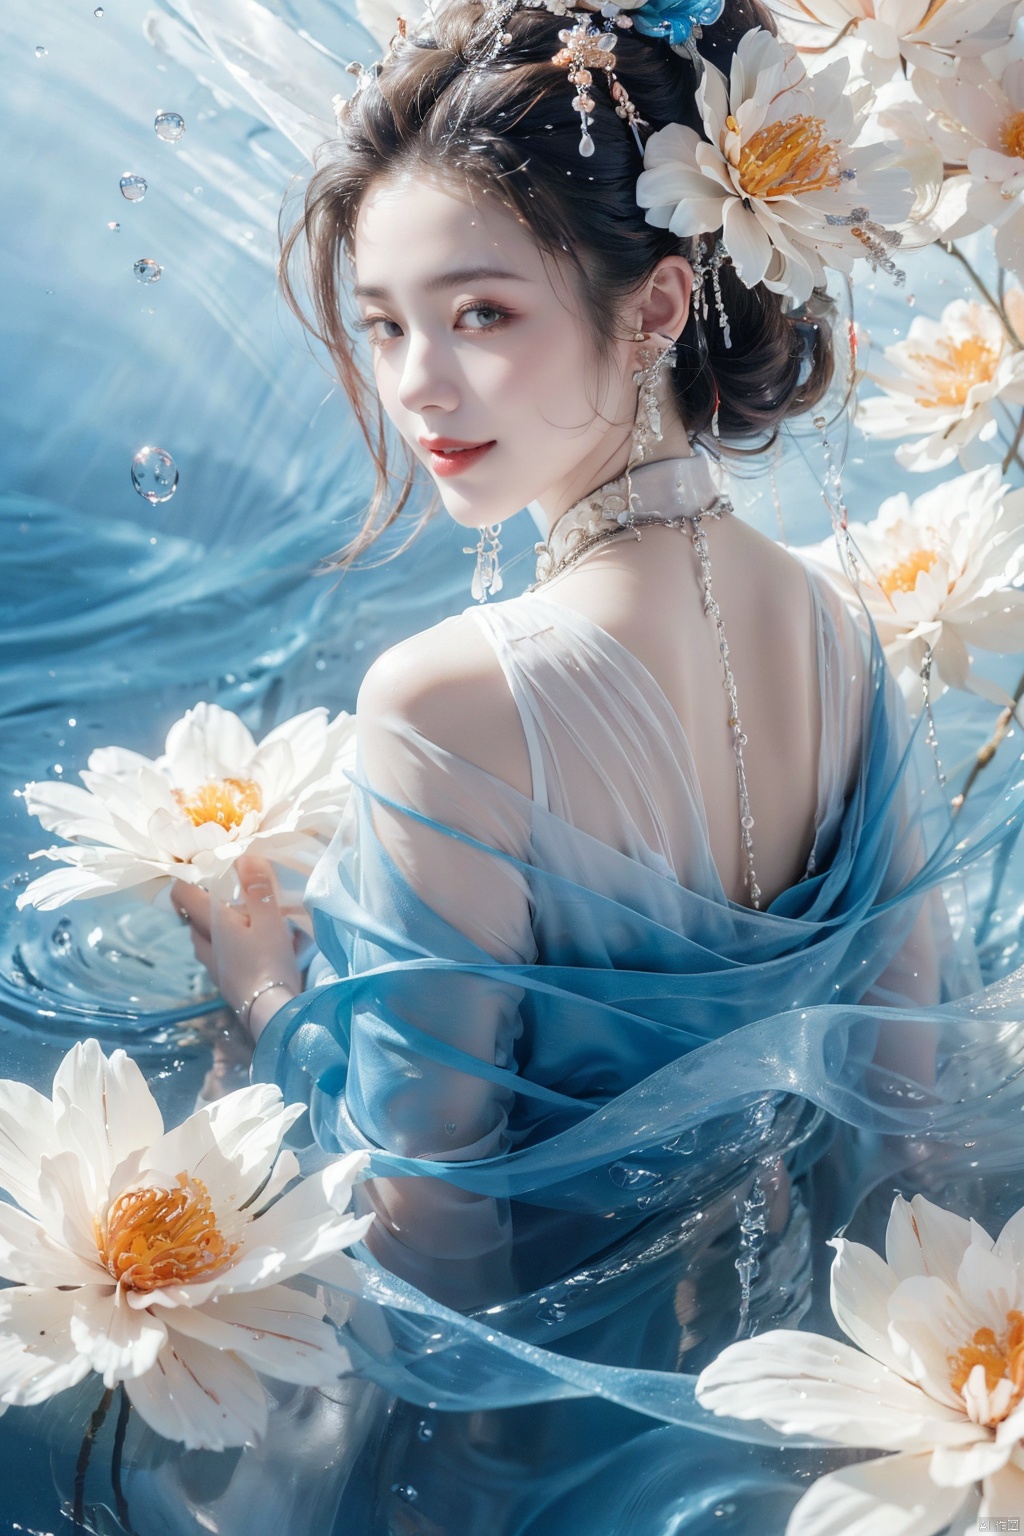  a dreamy and beautiful scene,flower dress,blue seawater,sea level,(there are many flowers on the clothes:1.3),frontlight,ambient_light,light_rays,Smile back, smile back,(Looking back and smiling:1.1)，(chuckles),Water, fair and wet skin,(clarityblue:1.3),sexy,large chest,the girl is lying on the water surface,(a lot of flowers:1.3),ripples,ripple,dark blue,float,bubble,HDR,UHD,8K,best quality,masterpiece,realistic,highres,masterpiece,